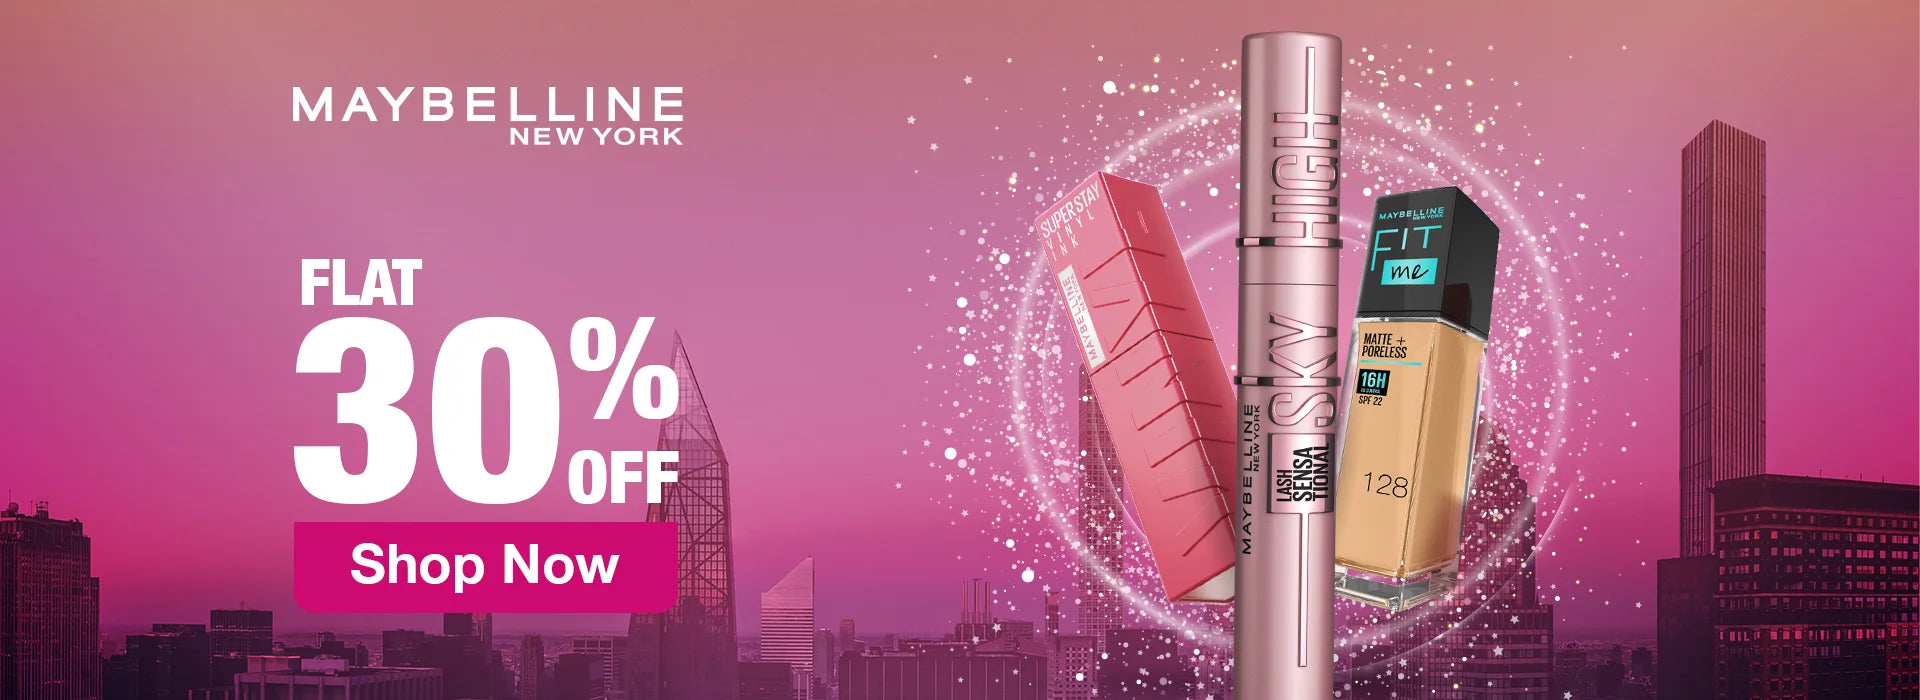 Maybelline | Flat 30% Off